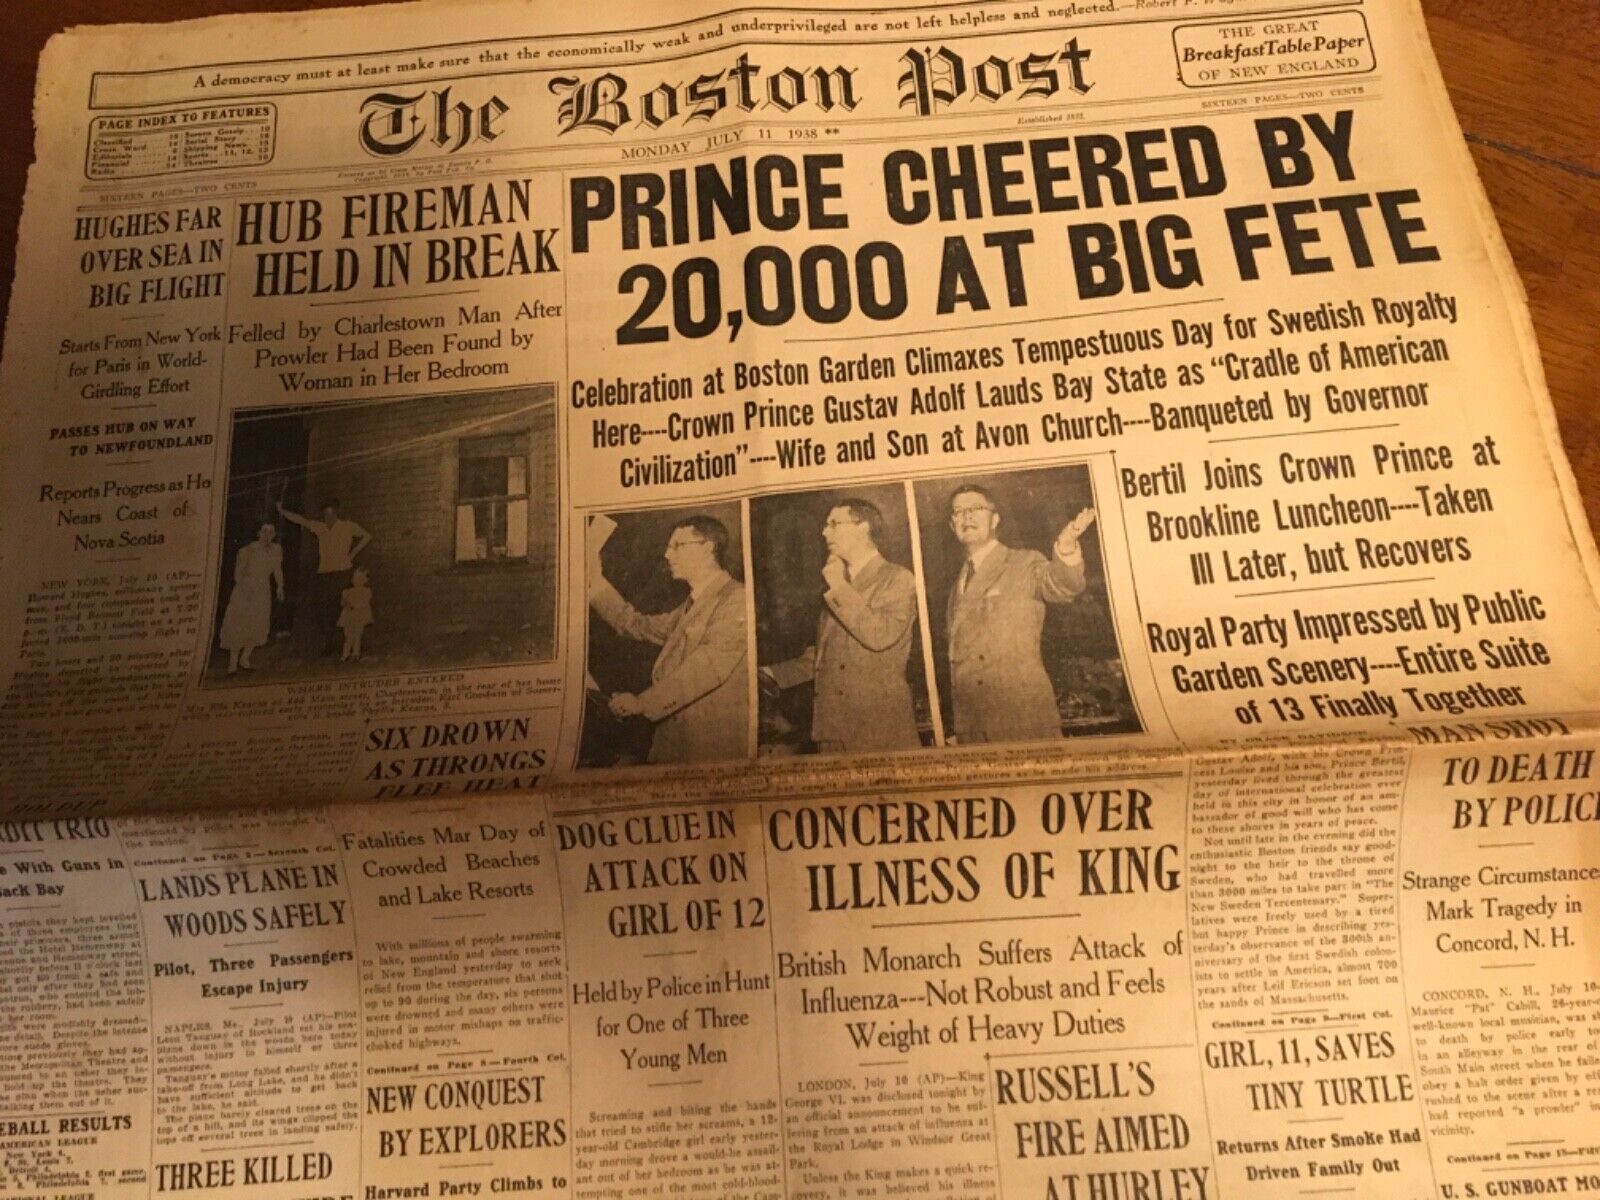 BOSTON POST NEWSPAPER JULY 11 1938. PRINCE CHEERED BY 20,000 AT BIG FETE.